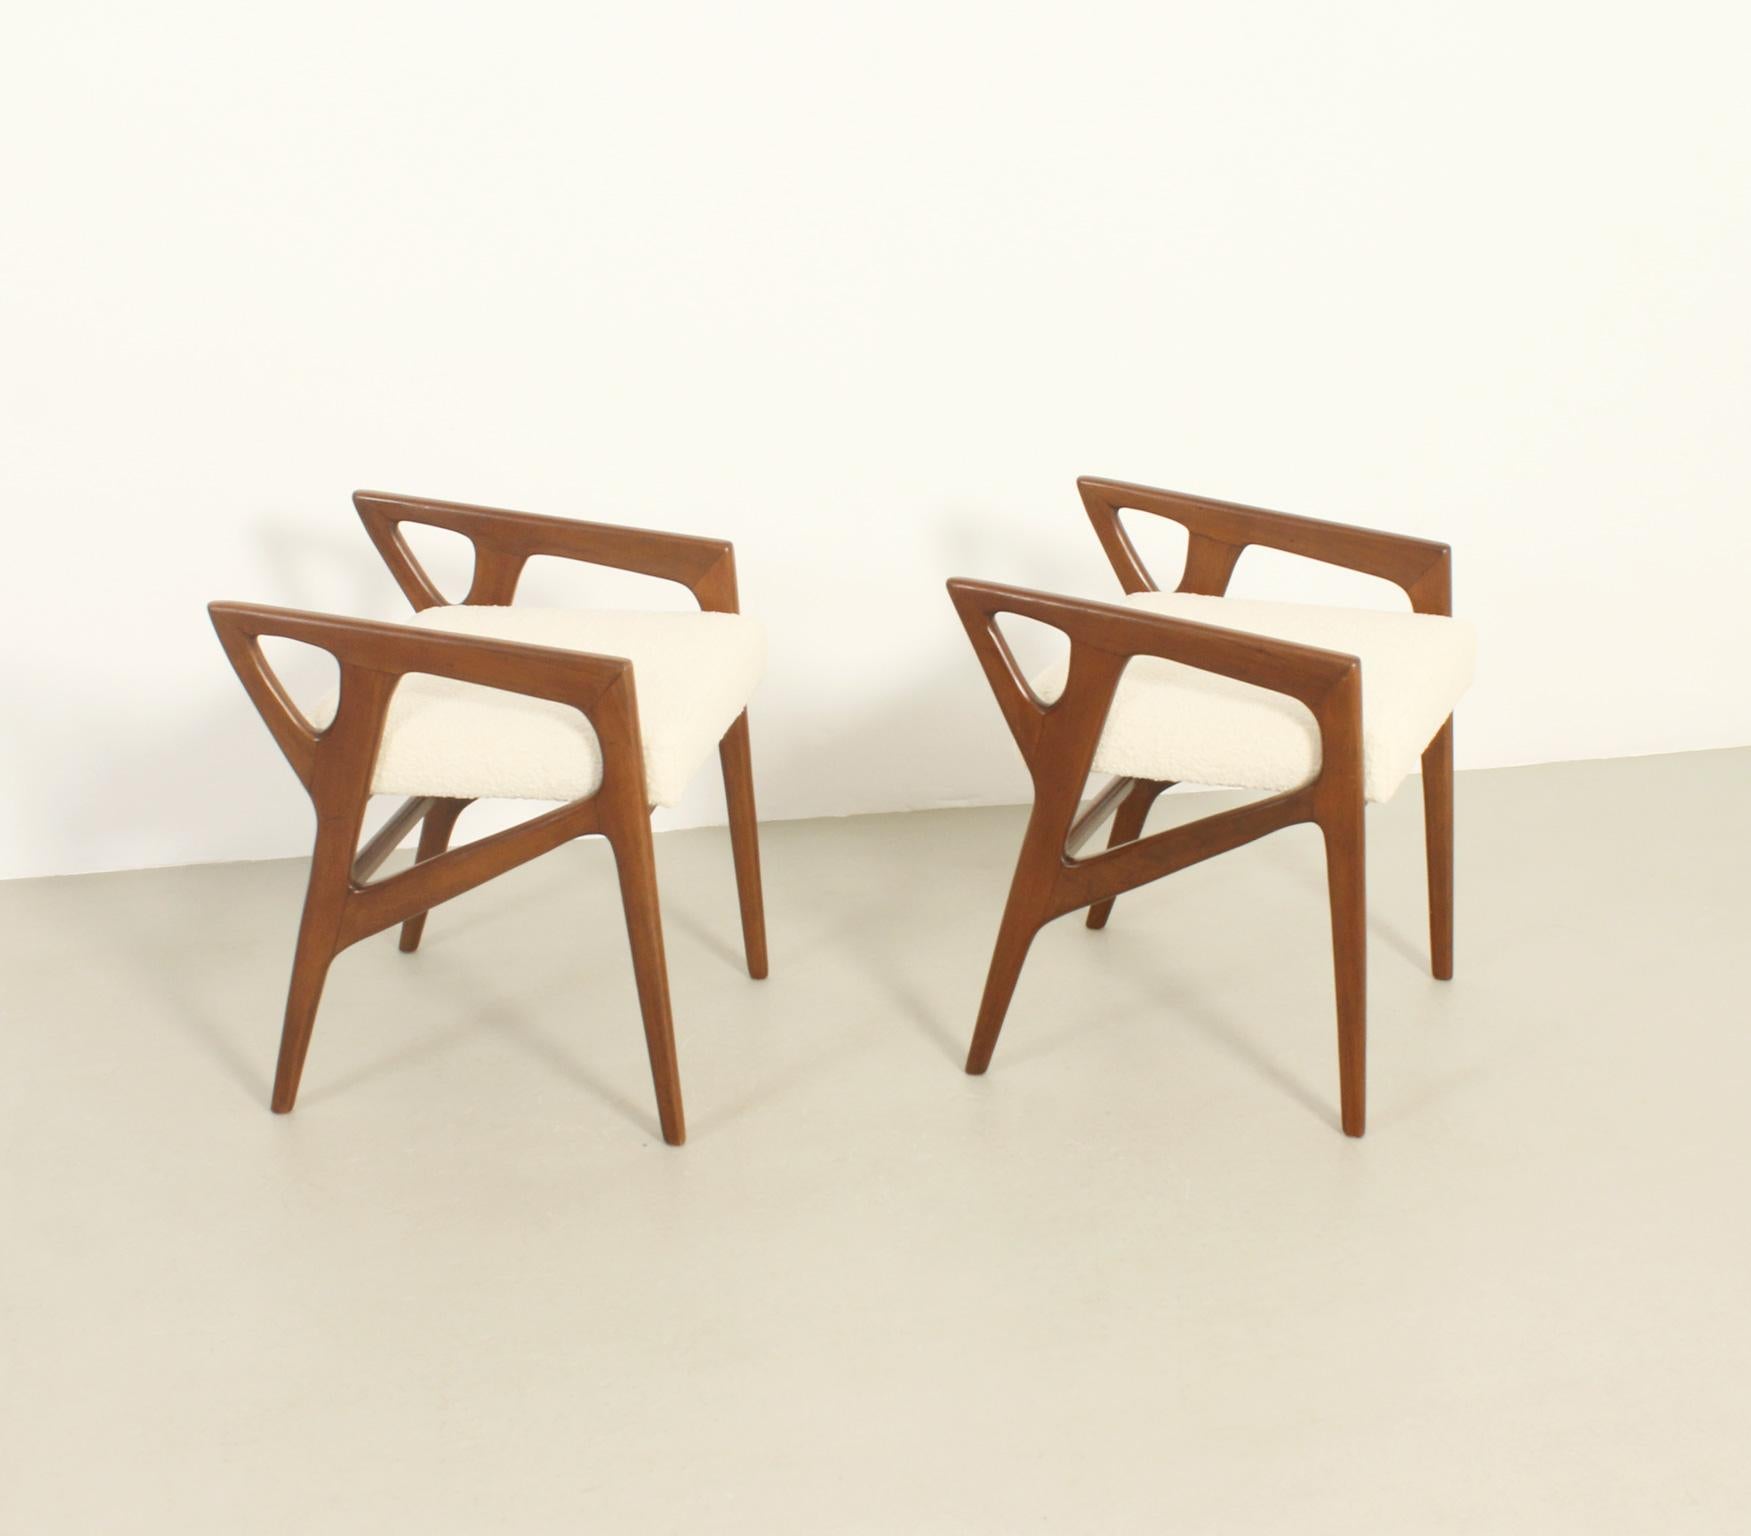 Pair of Stools by Gio Ponti for Cassina, Italy, 1953 For Sale 5